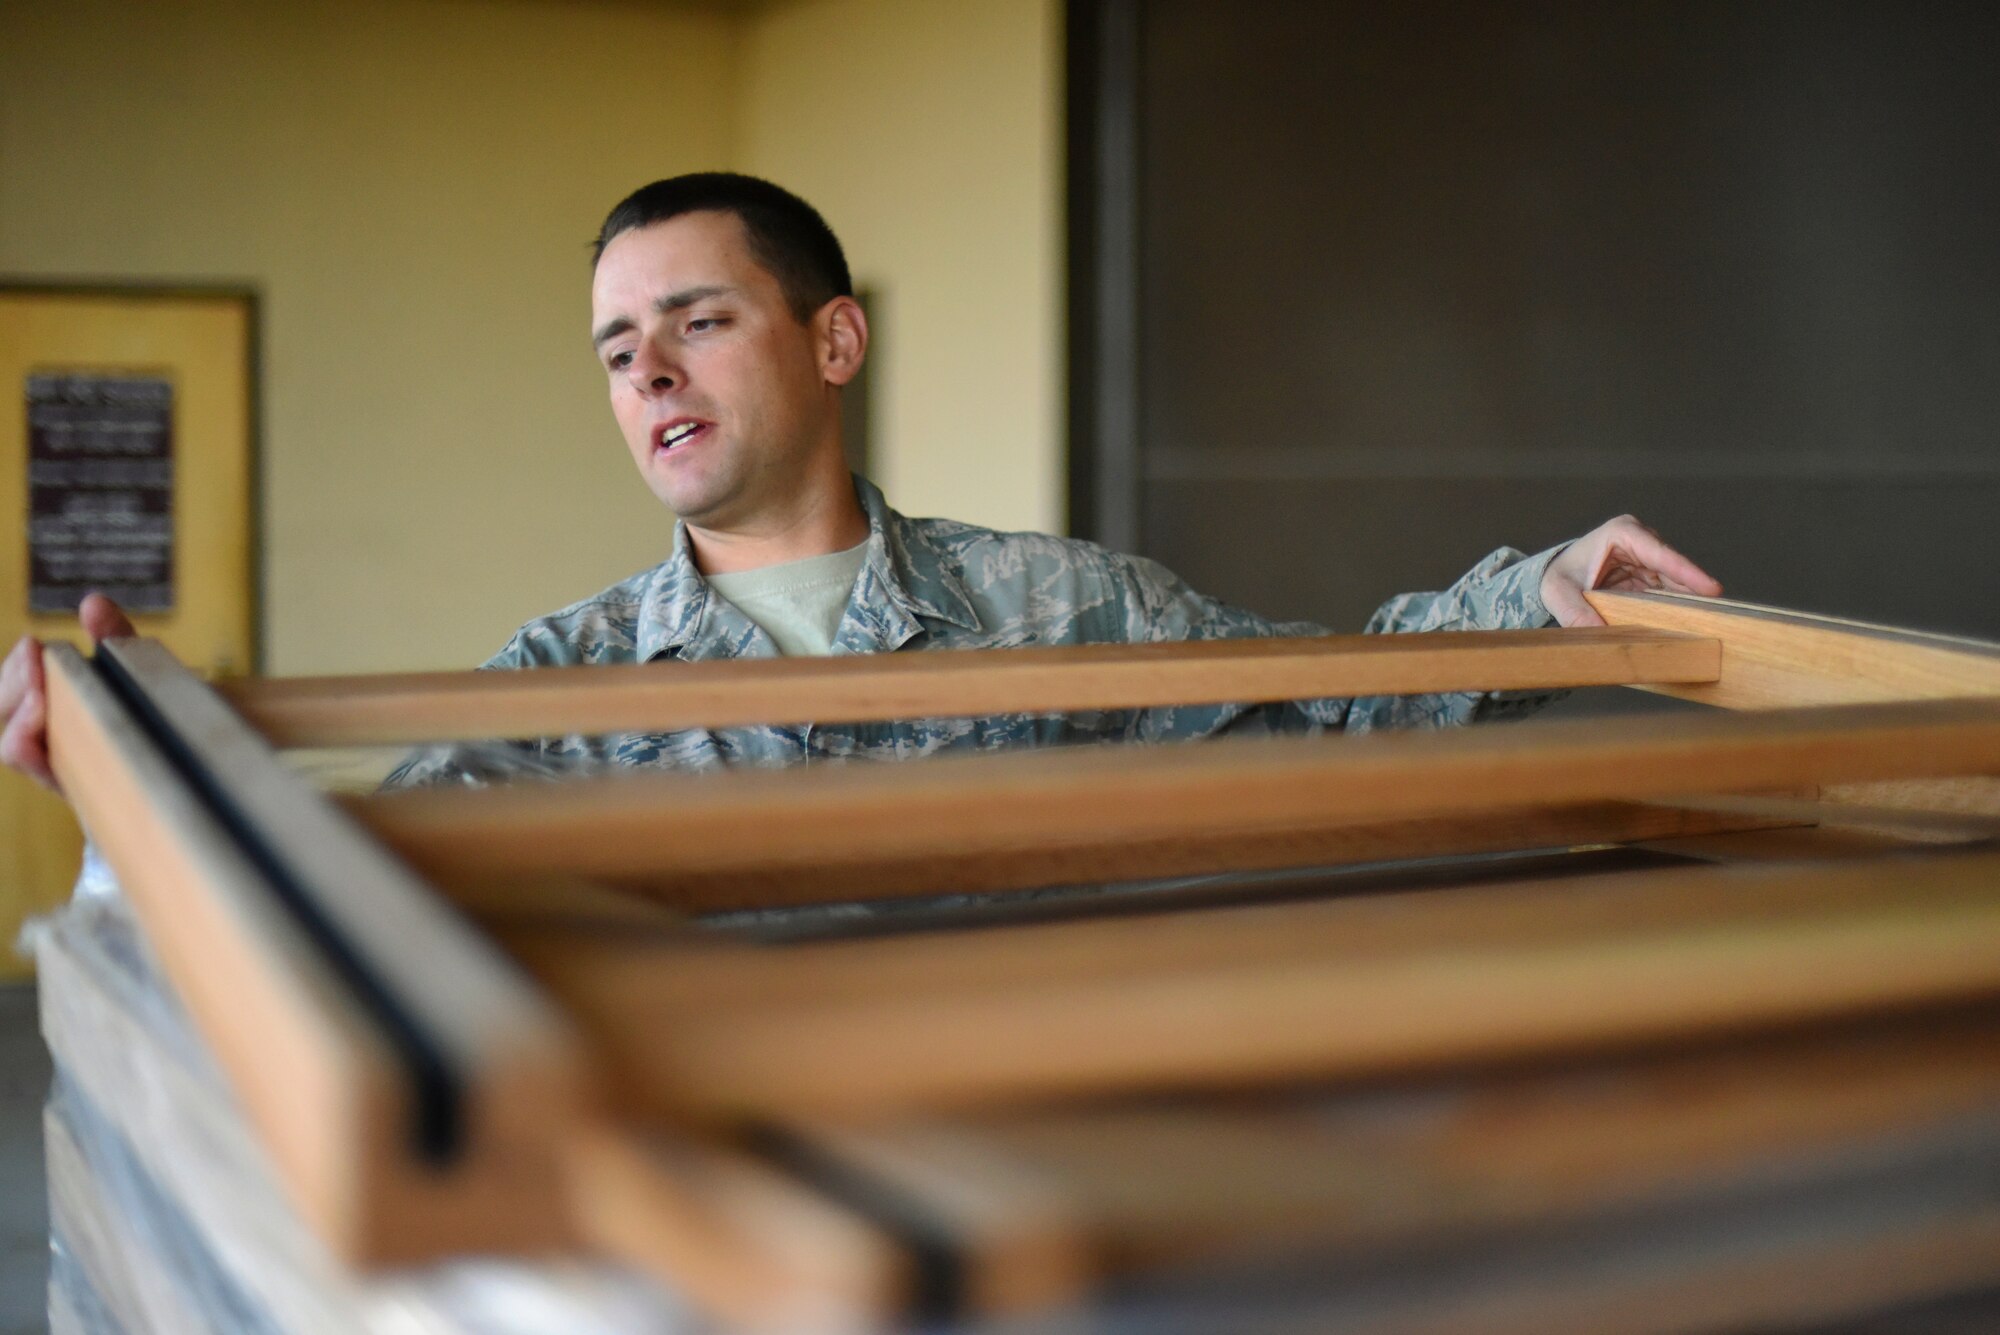 Tech. Sgt. Lee Olson, 341st Operations Group supply coordinator, inspects new bed frames before transporting them into the OG supply warehouse on Oct. 20 to be stored for distribution. The bed frames are just a few items purchased with more than $1 million worth of Force Improvement Program funds, being used to provide a better quality of life for Airmen. (U.S. Air Force photo/Airman 1st Class Collin Schmidt)